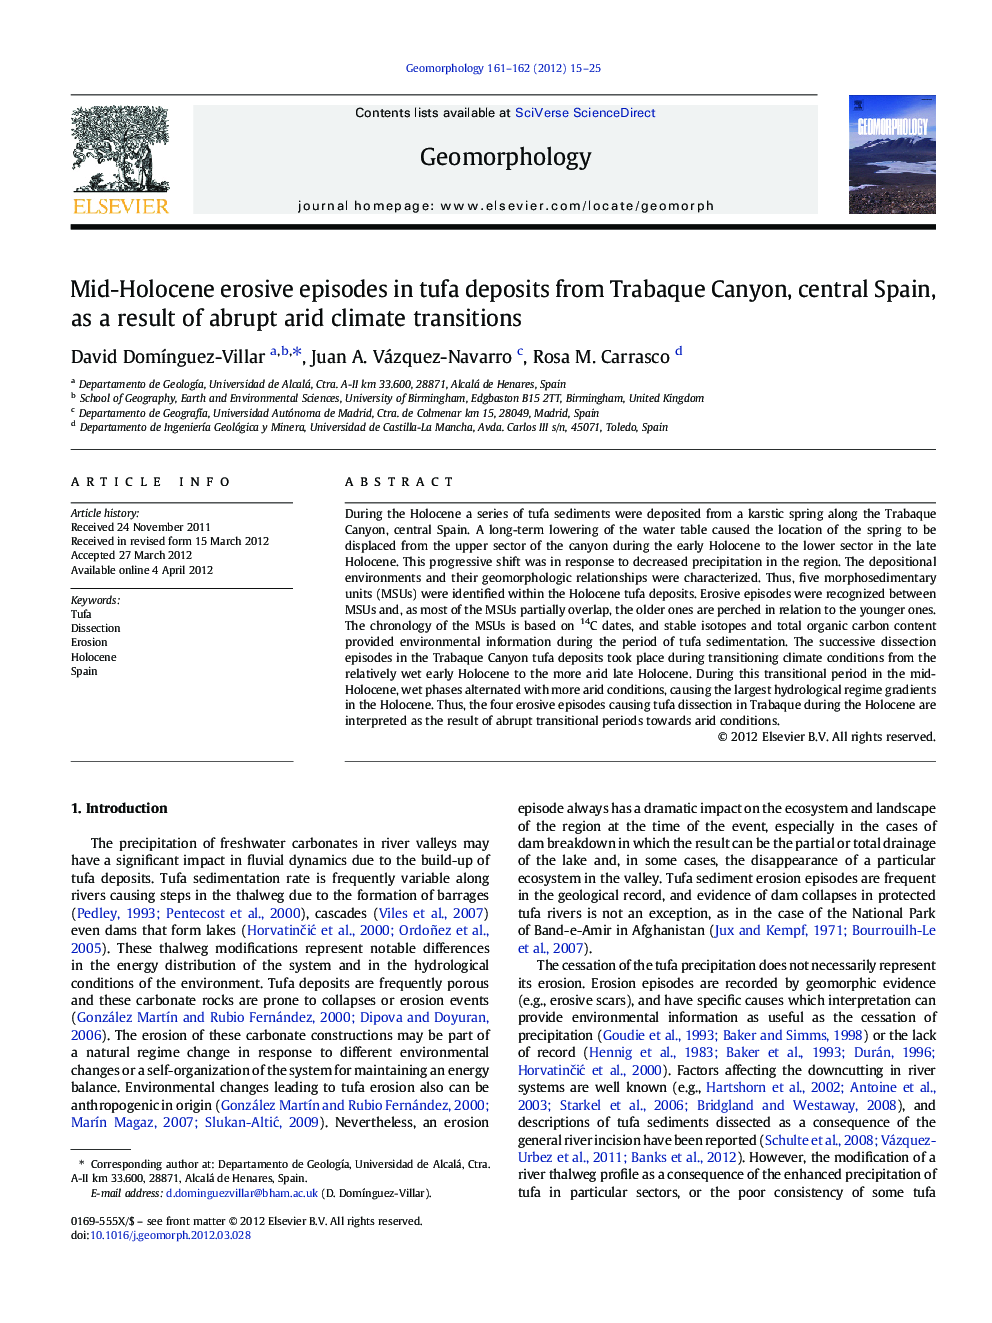 Mid-Holocene erosive episodes in tufa deposits from Trabaque Canyon, central Spain, as a result of abrupt arid climate transitions